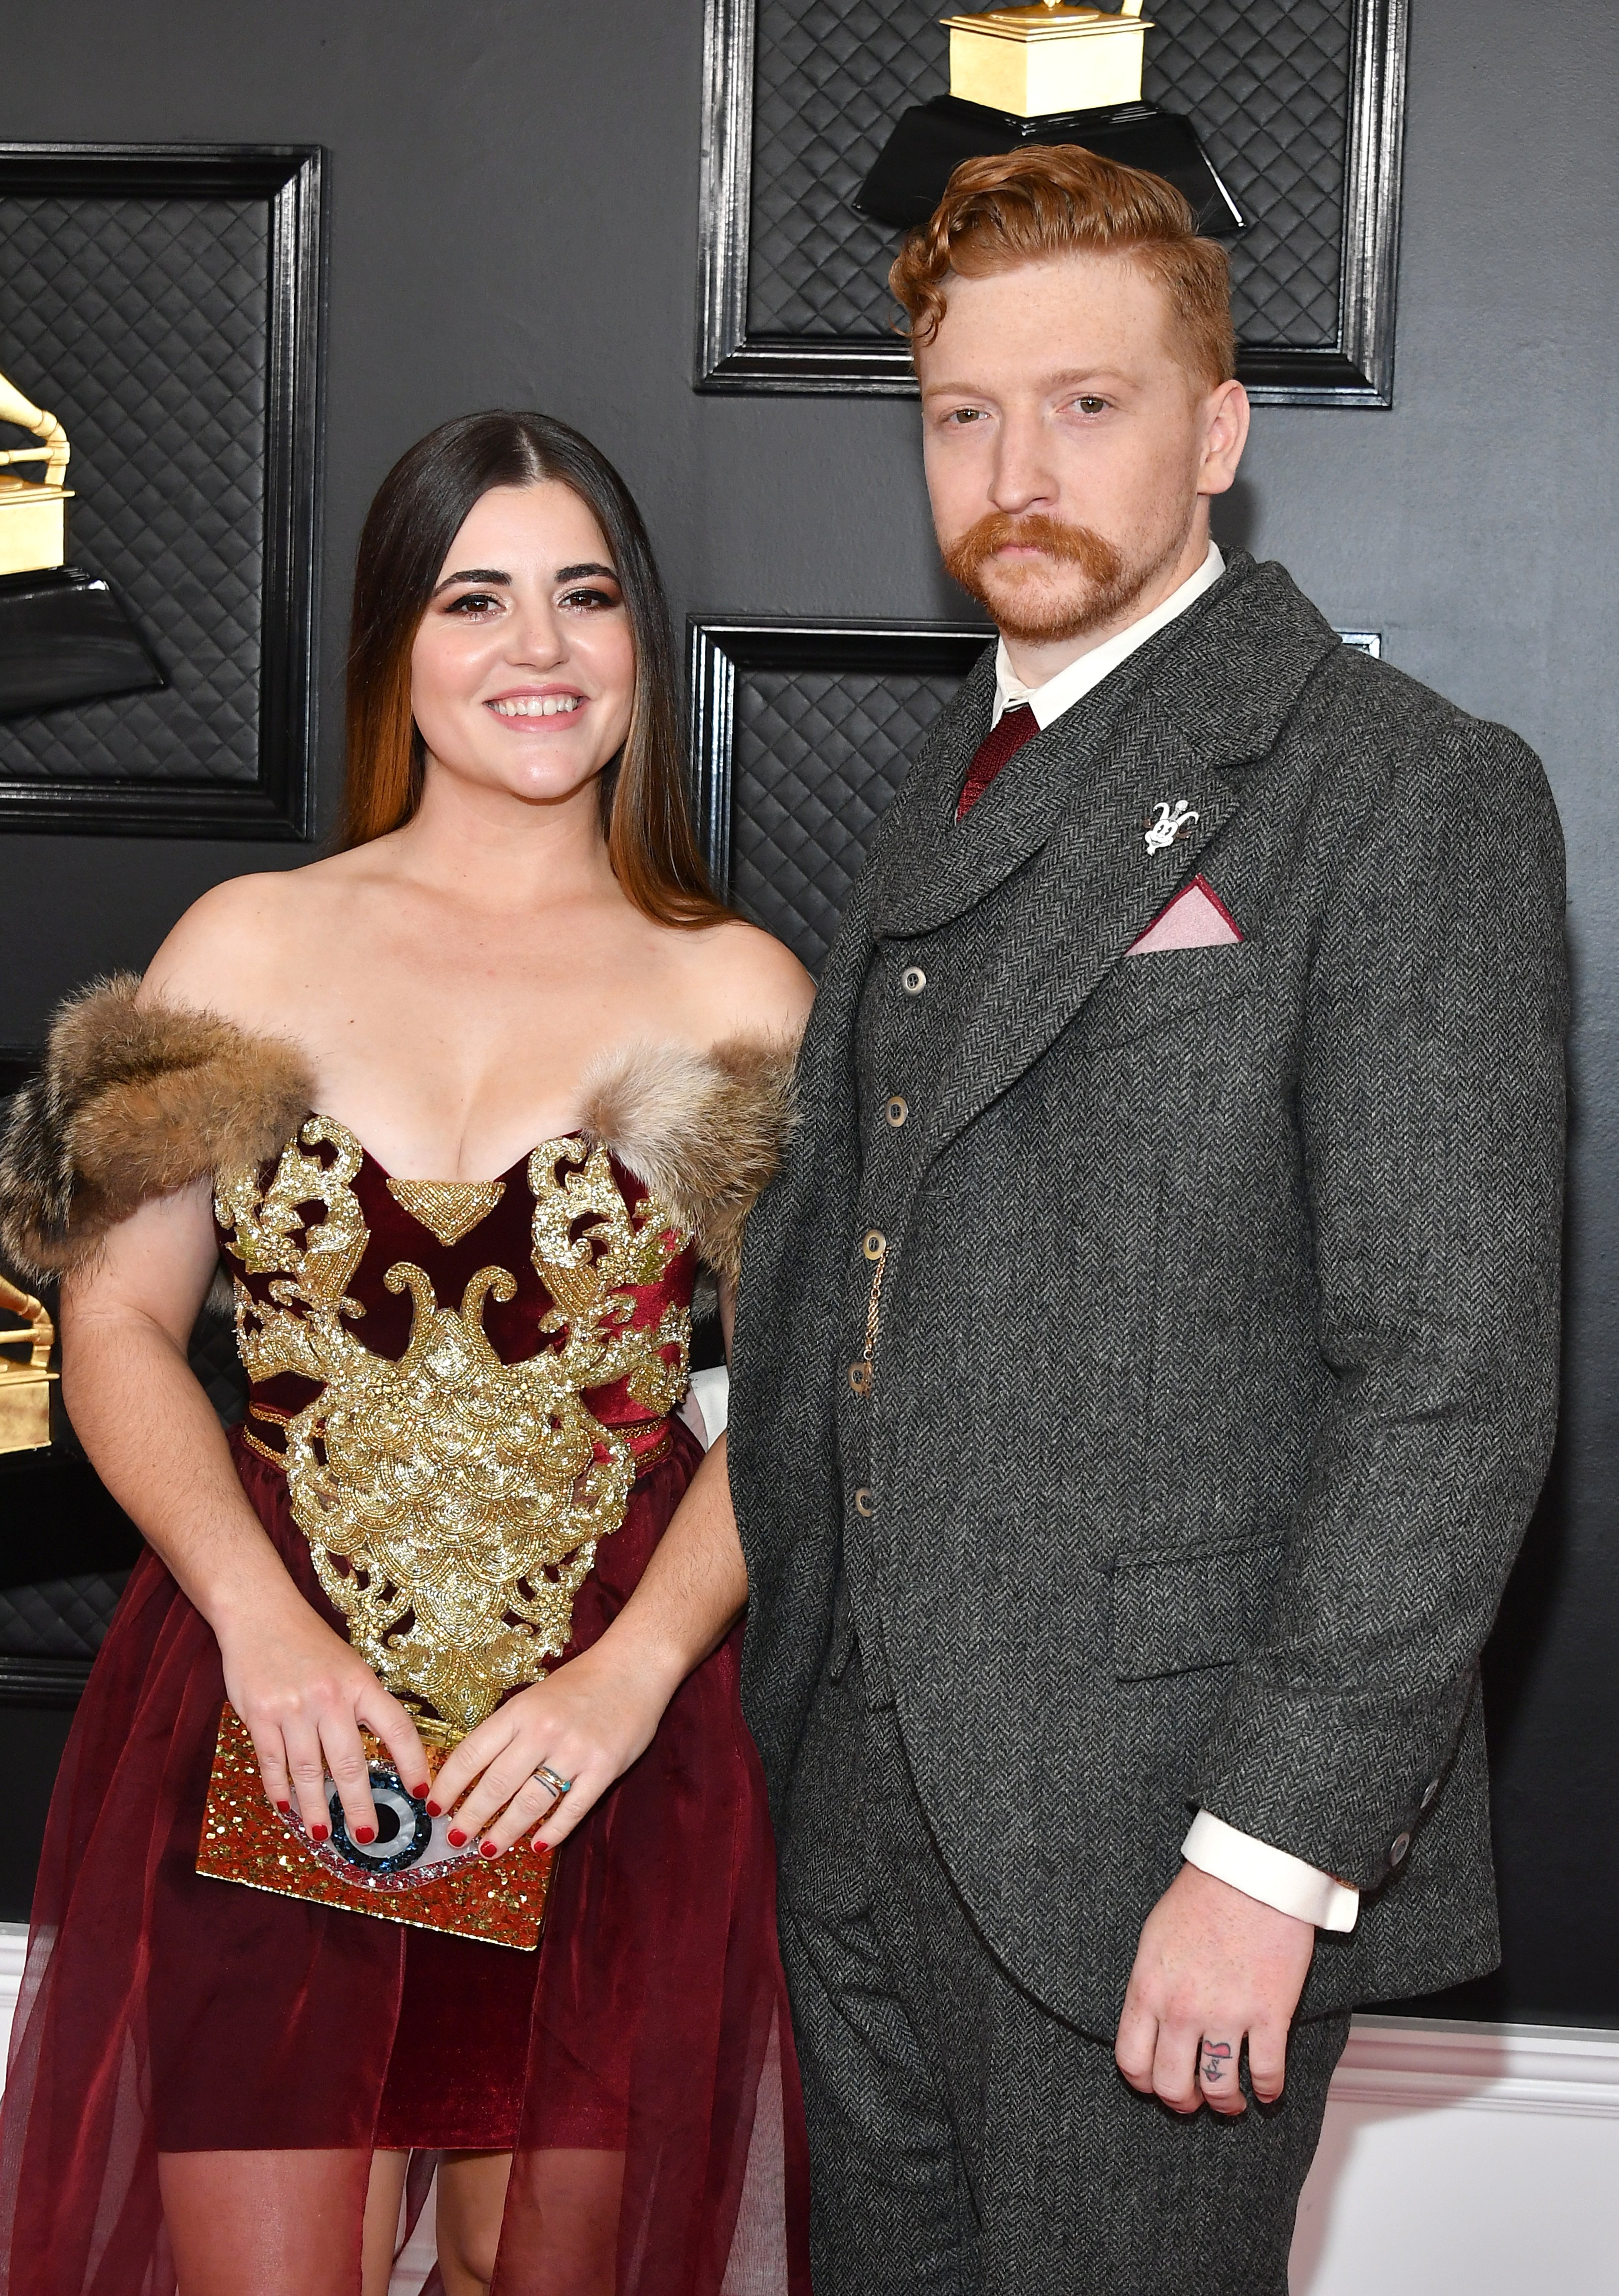 Senora May and Tyler Childers at the 62nd Annual GRAMMY Awards in 2020 in Los Angeles. | Source: Getty Images